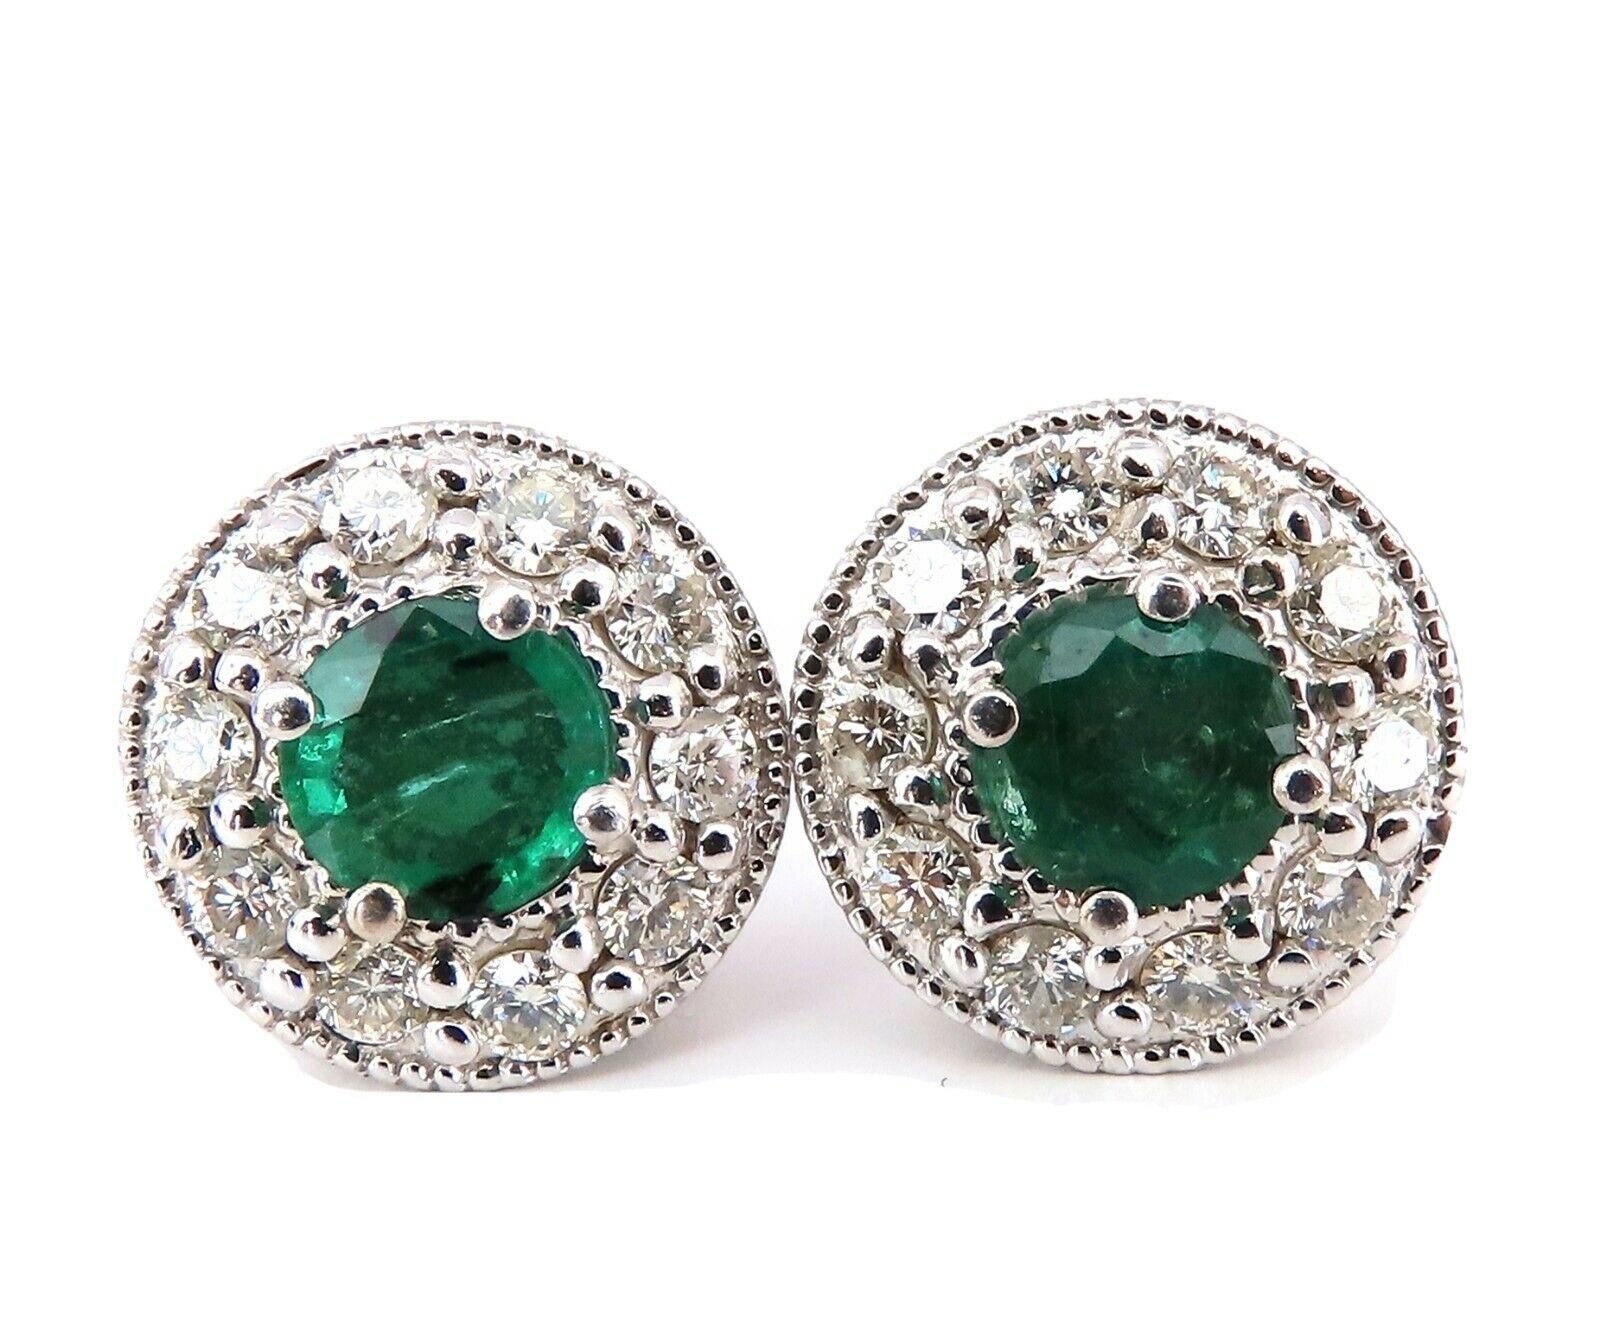 Round Halo cluster earrings.

1.30 carat natural round emeralds.

Full cut brilliant clean clarity and transparent

Emeralds measure 5.3 mm each in diameter

1.00 carat round diamonds

G color vs2 clarity

14 karat white gold 4.8 g

Diameter of